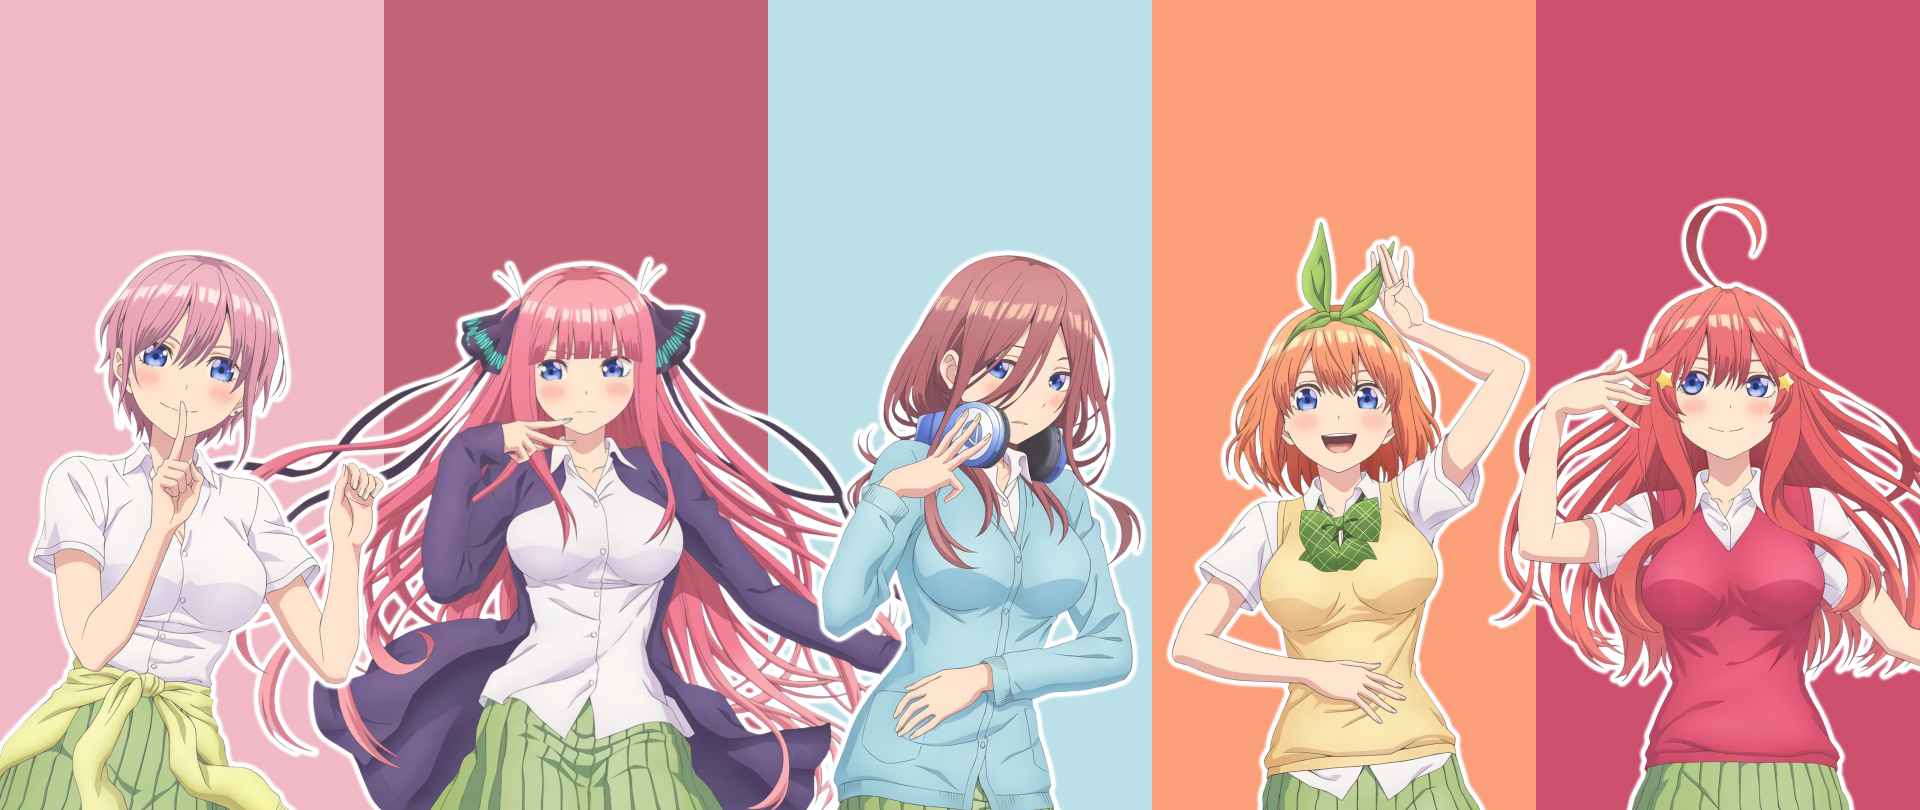 360+ The Quintessential Quintuplets HD Wallpapers and Backgrounds.